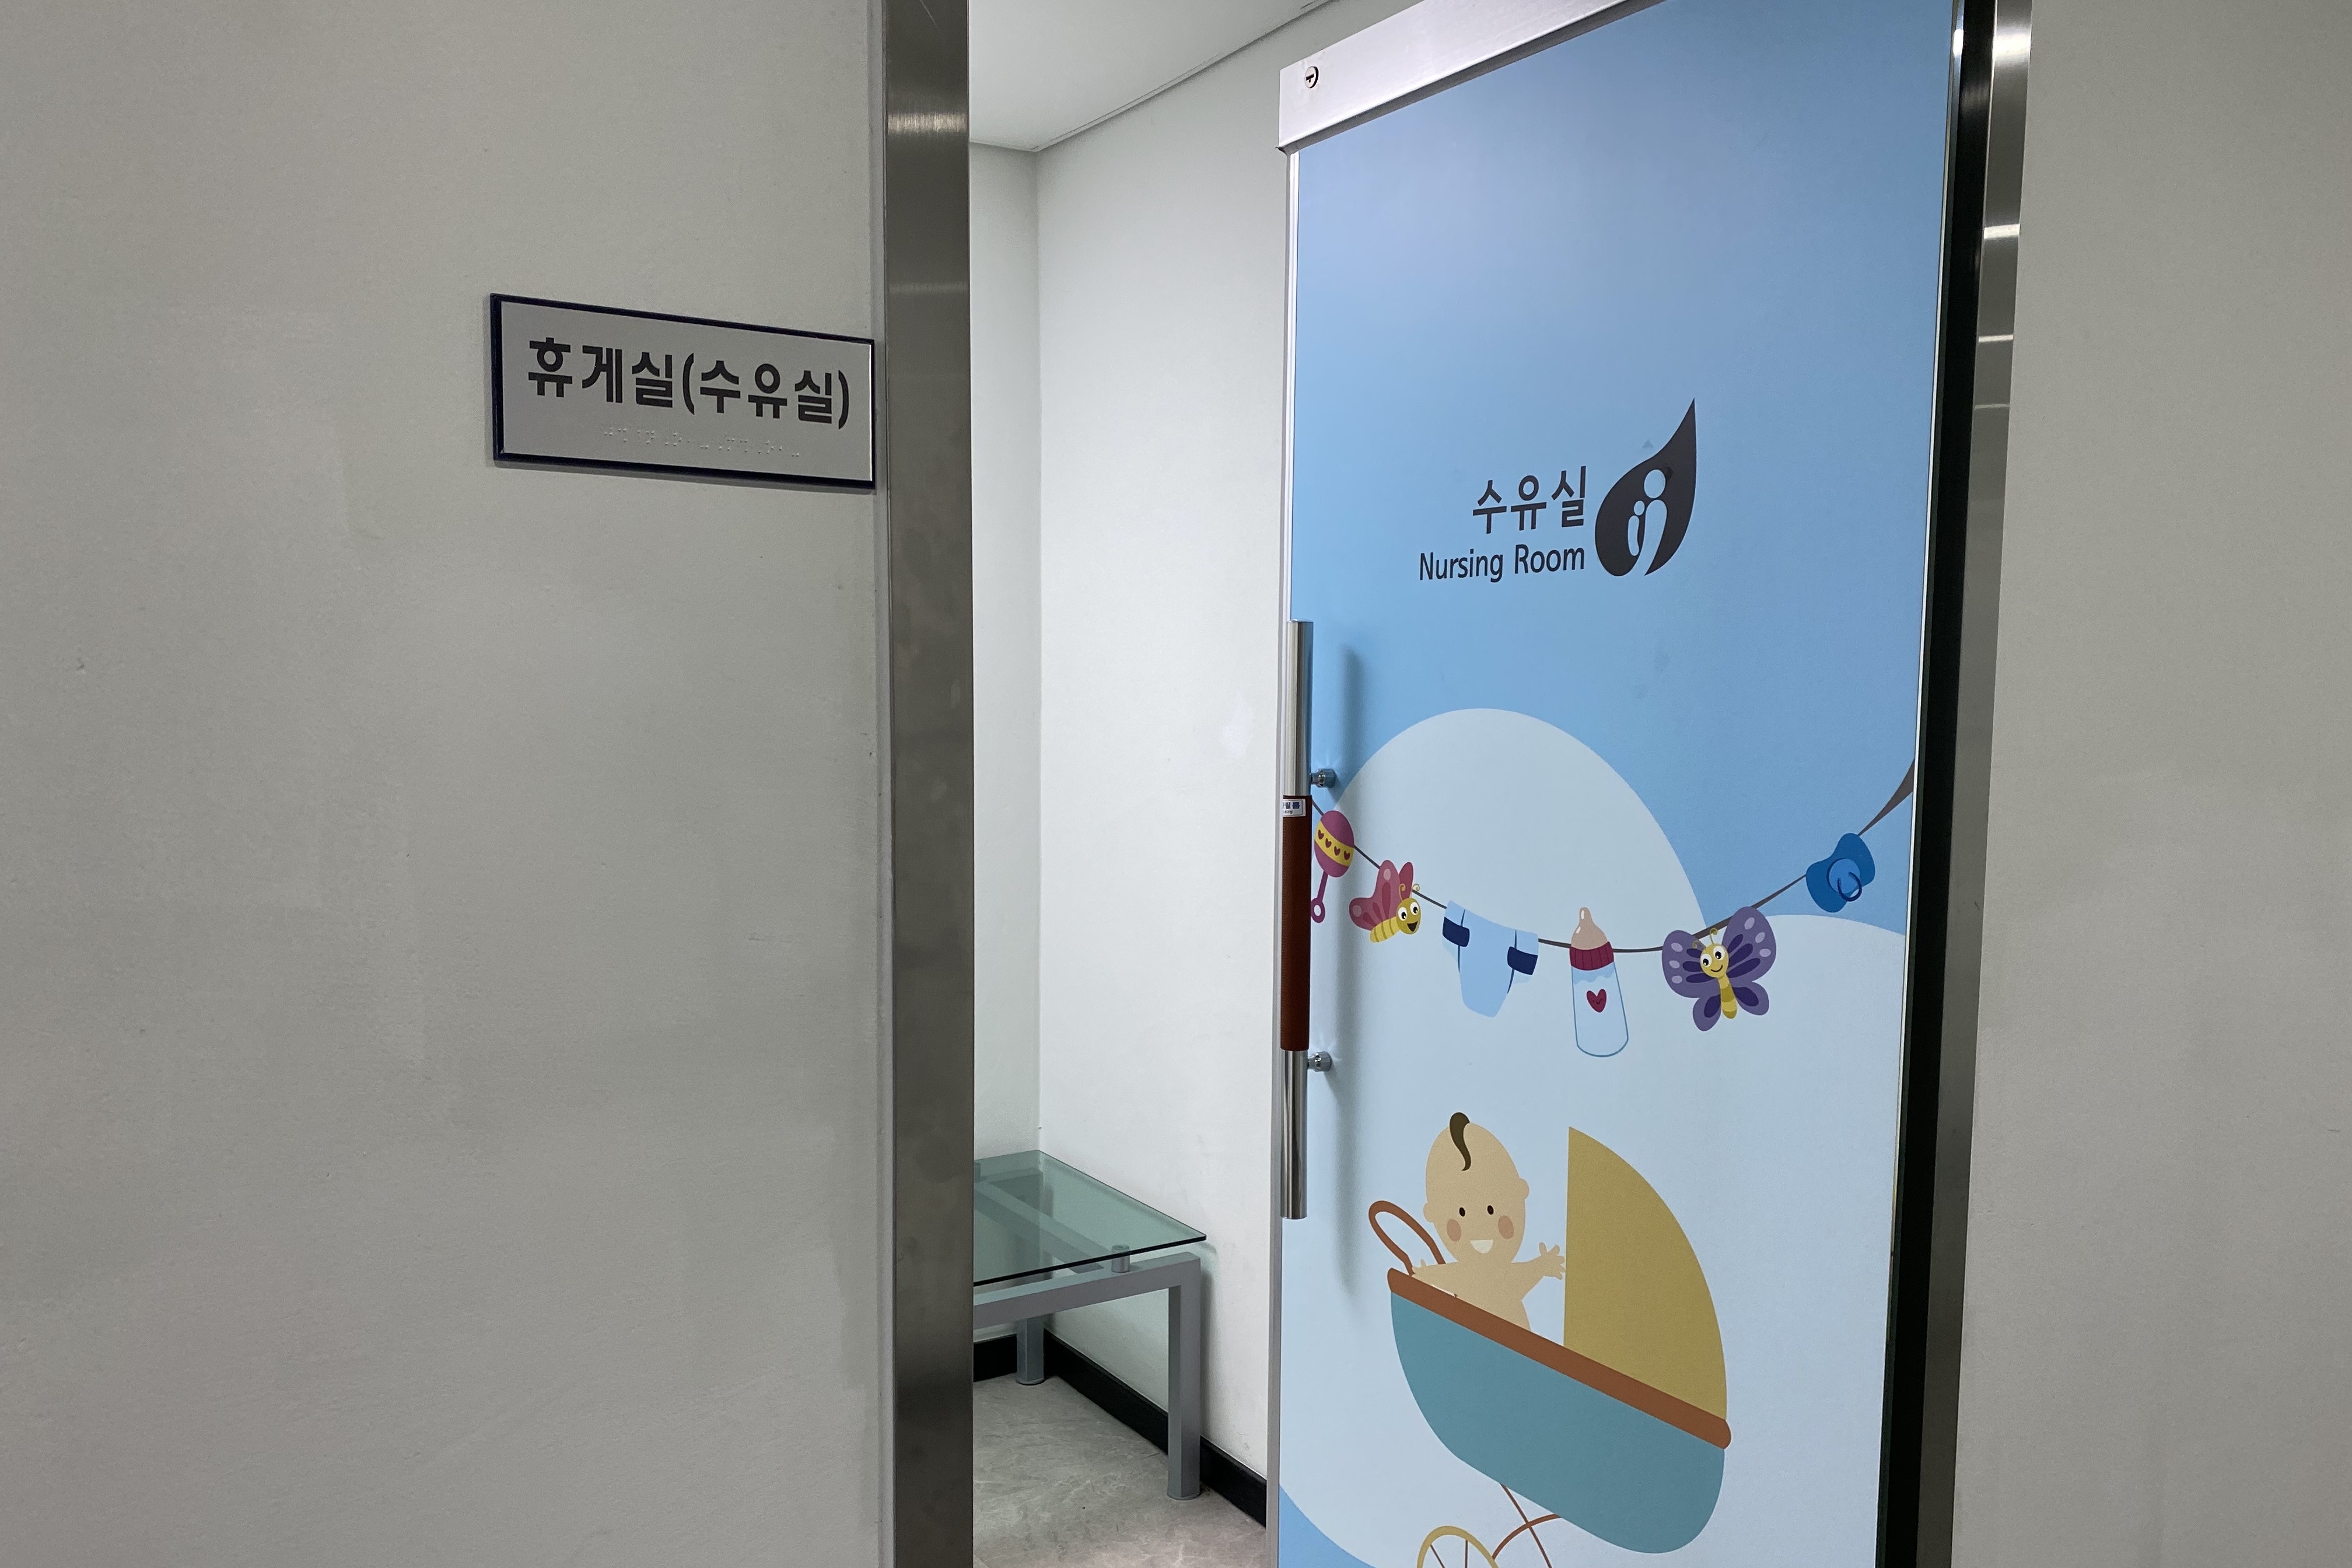 Lounge for families with infants0 : Entrance of the nursing room at the Buramsan Butterfly Garden